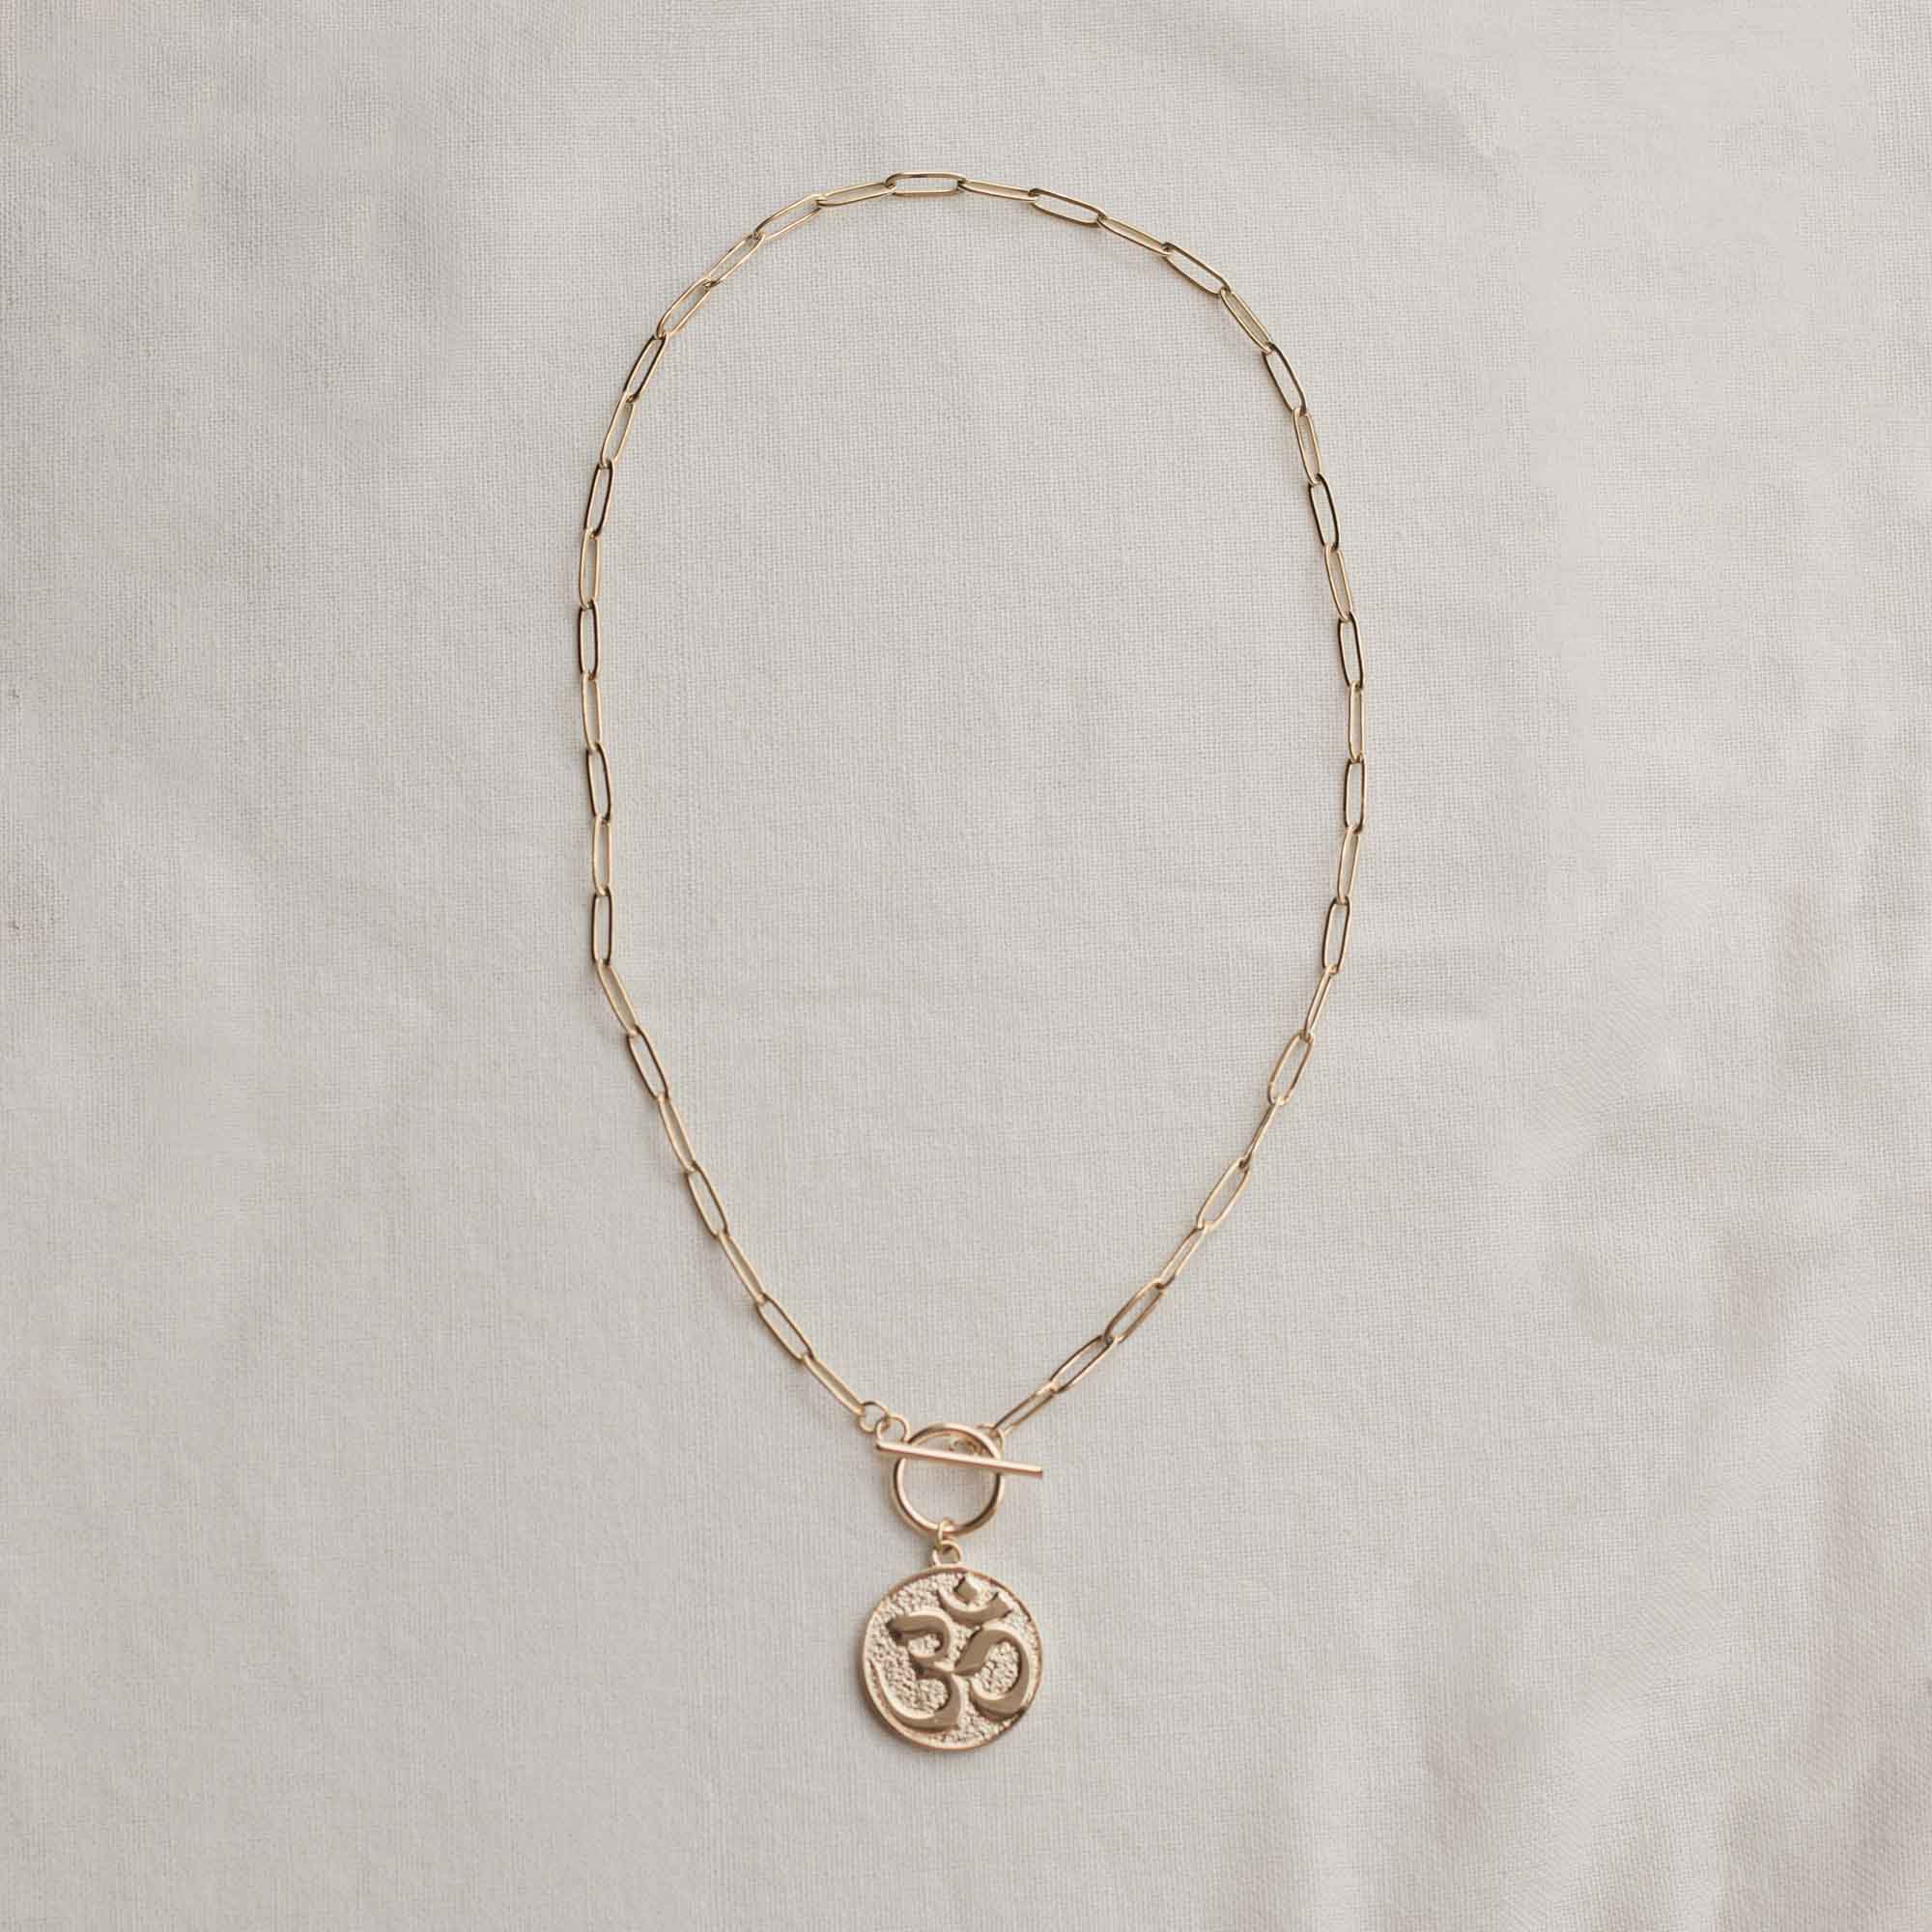 Ohm bulky chain necklace